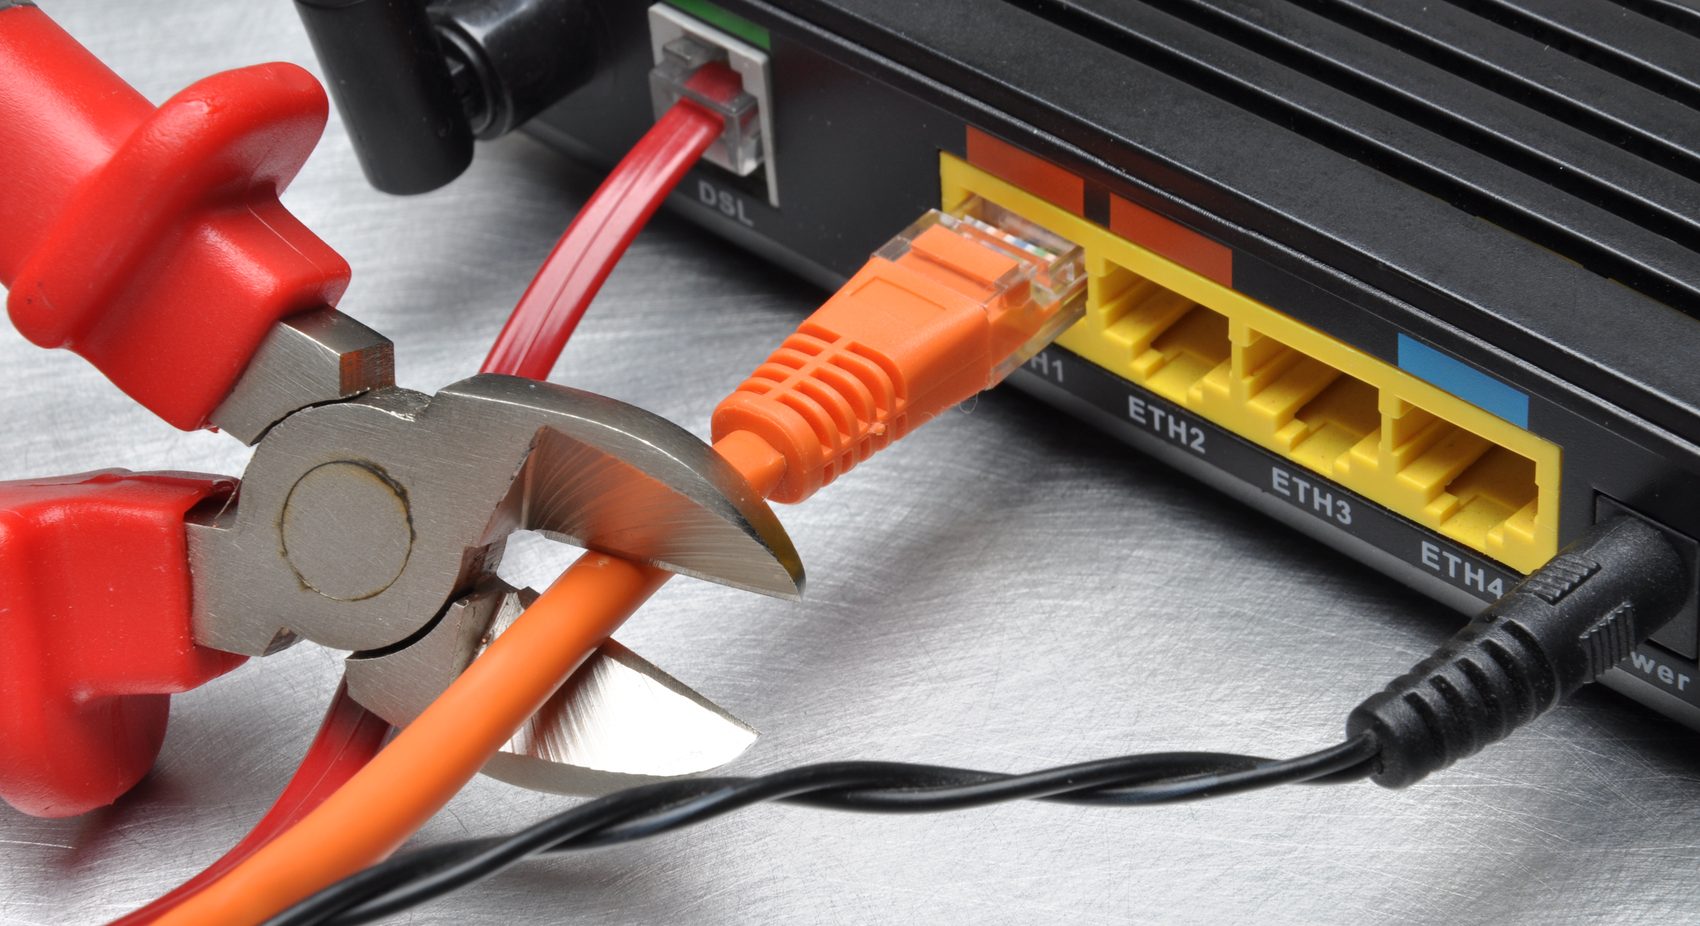 Image of a internet cable being cut.